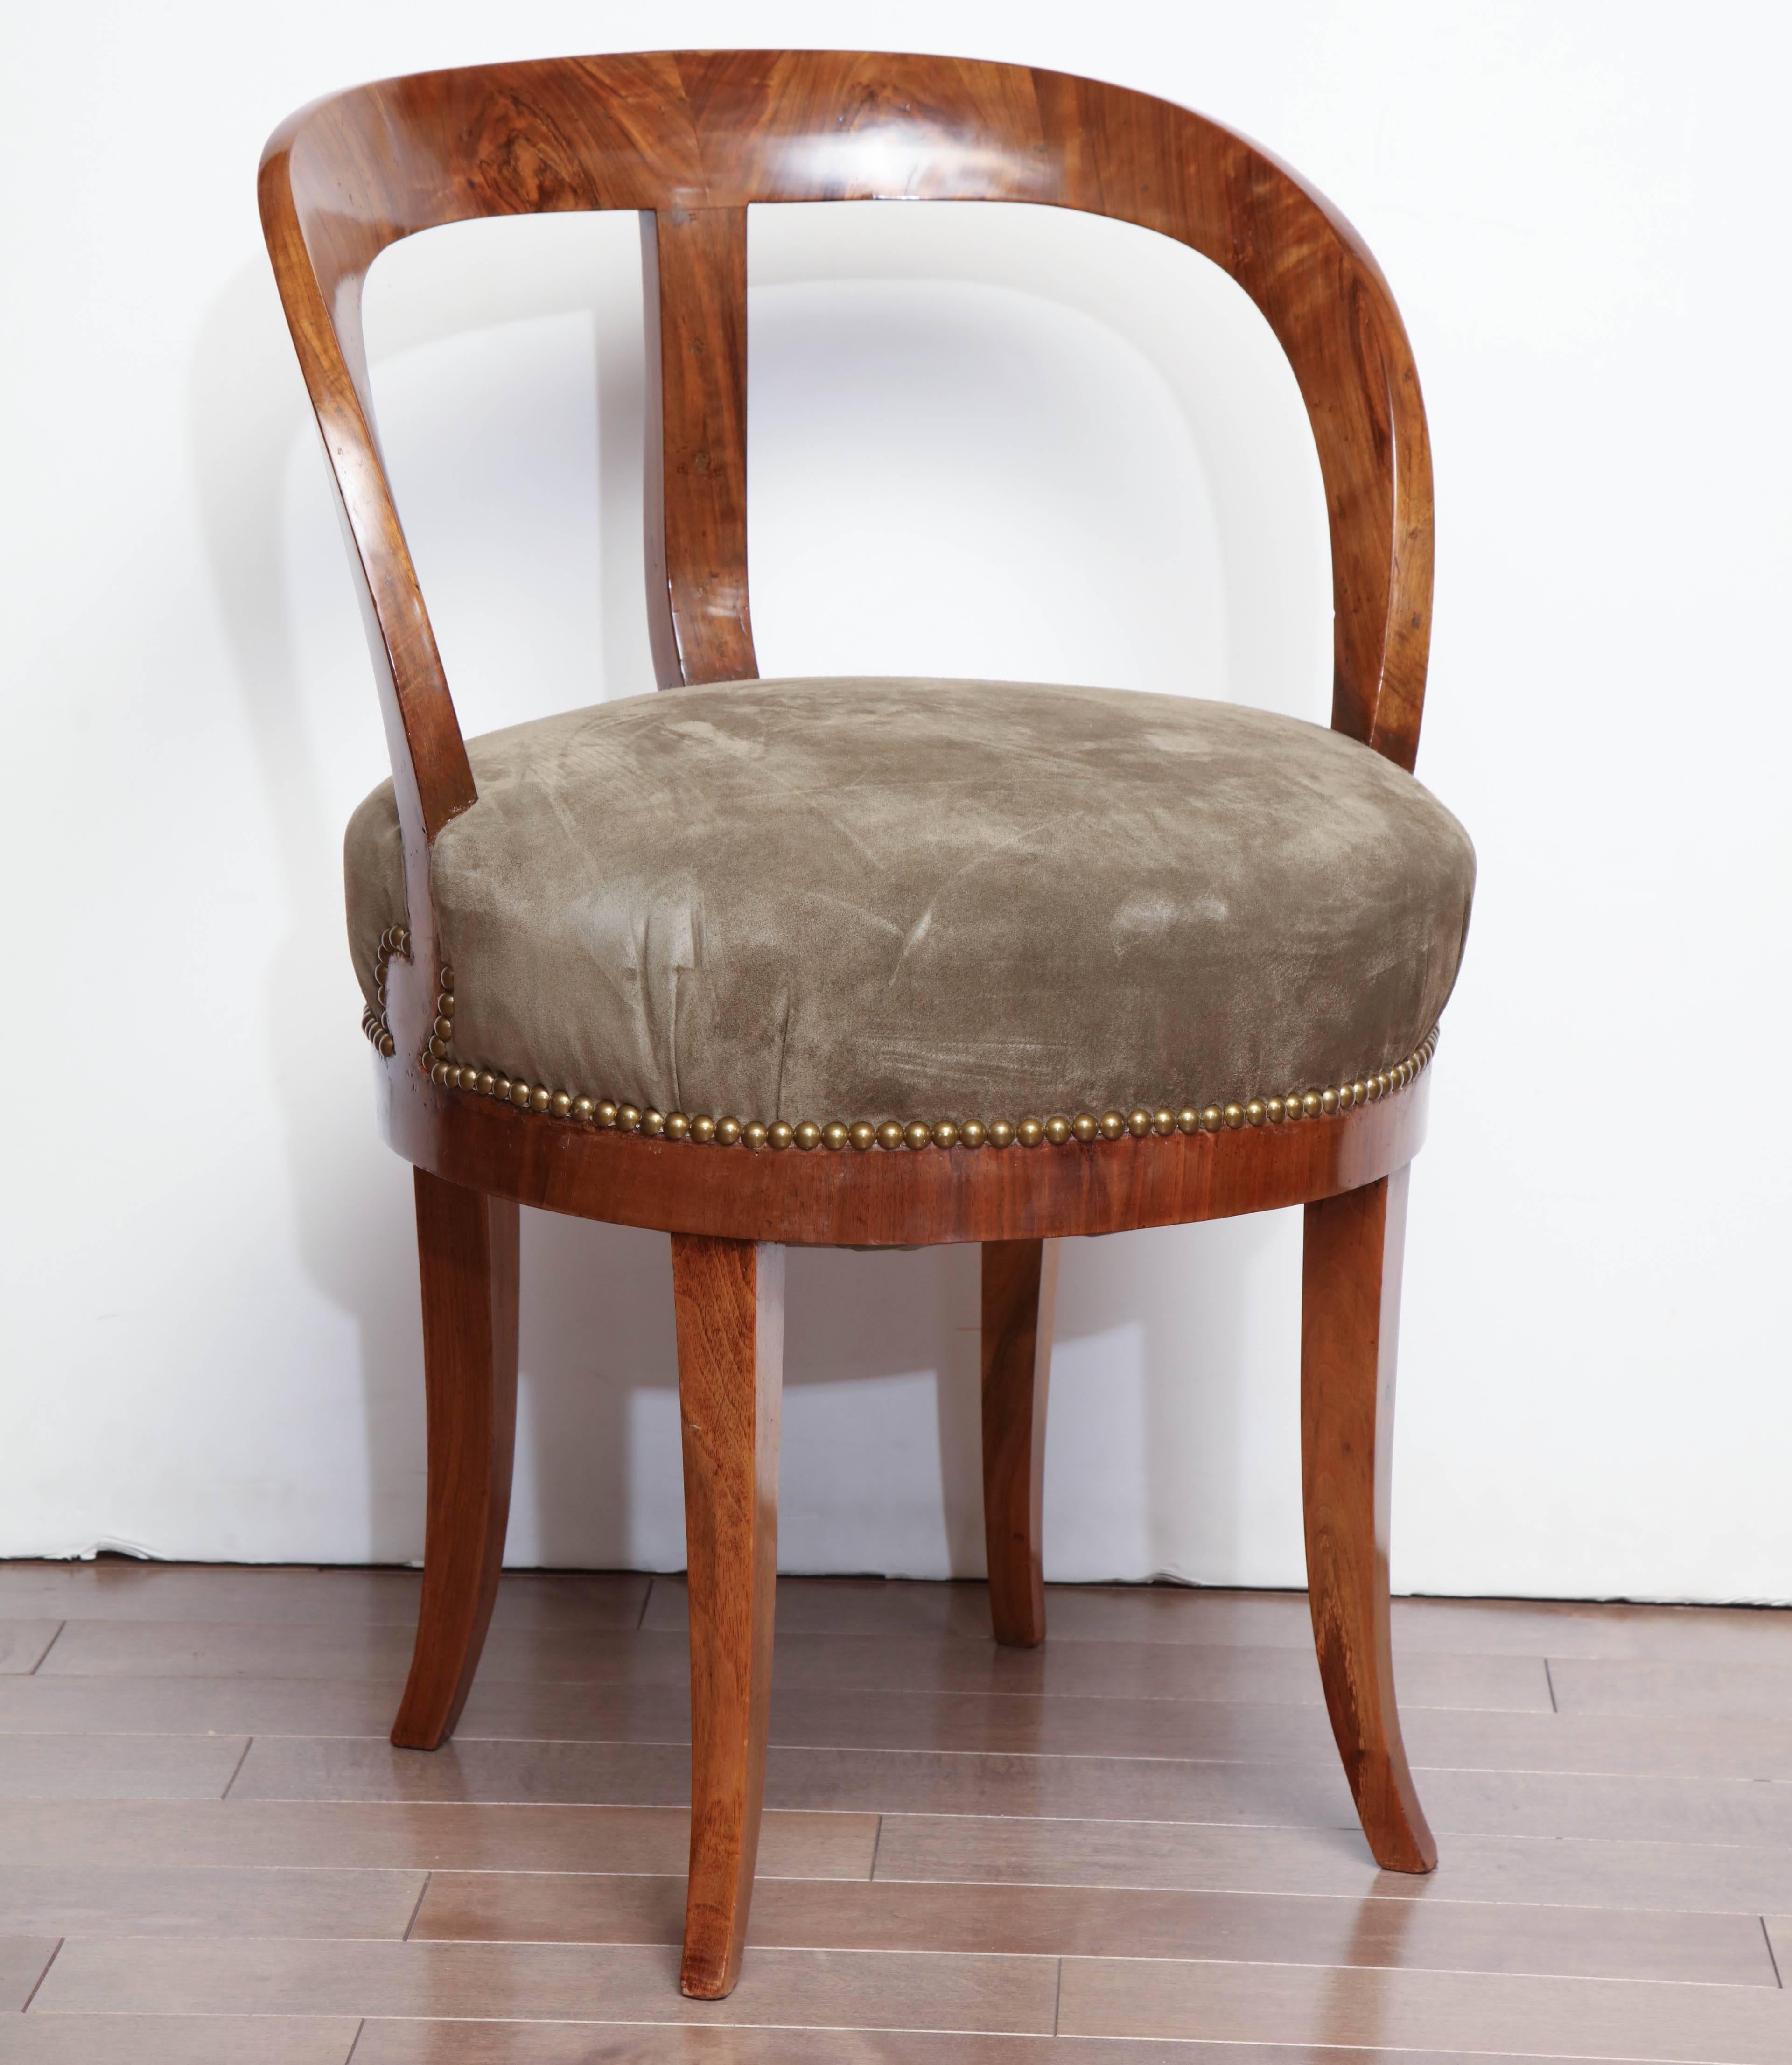 Early 19th century Austrian, walnut armchair upholstered in green suede.